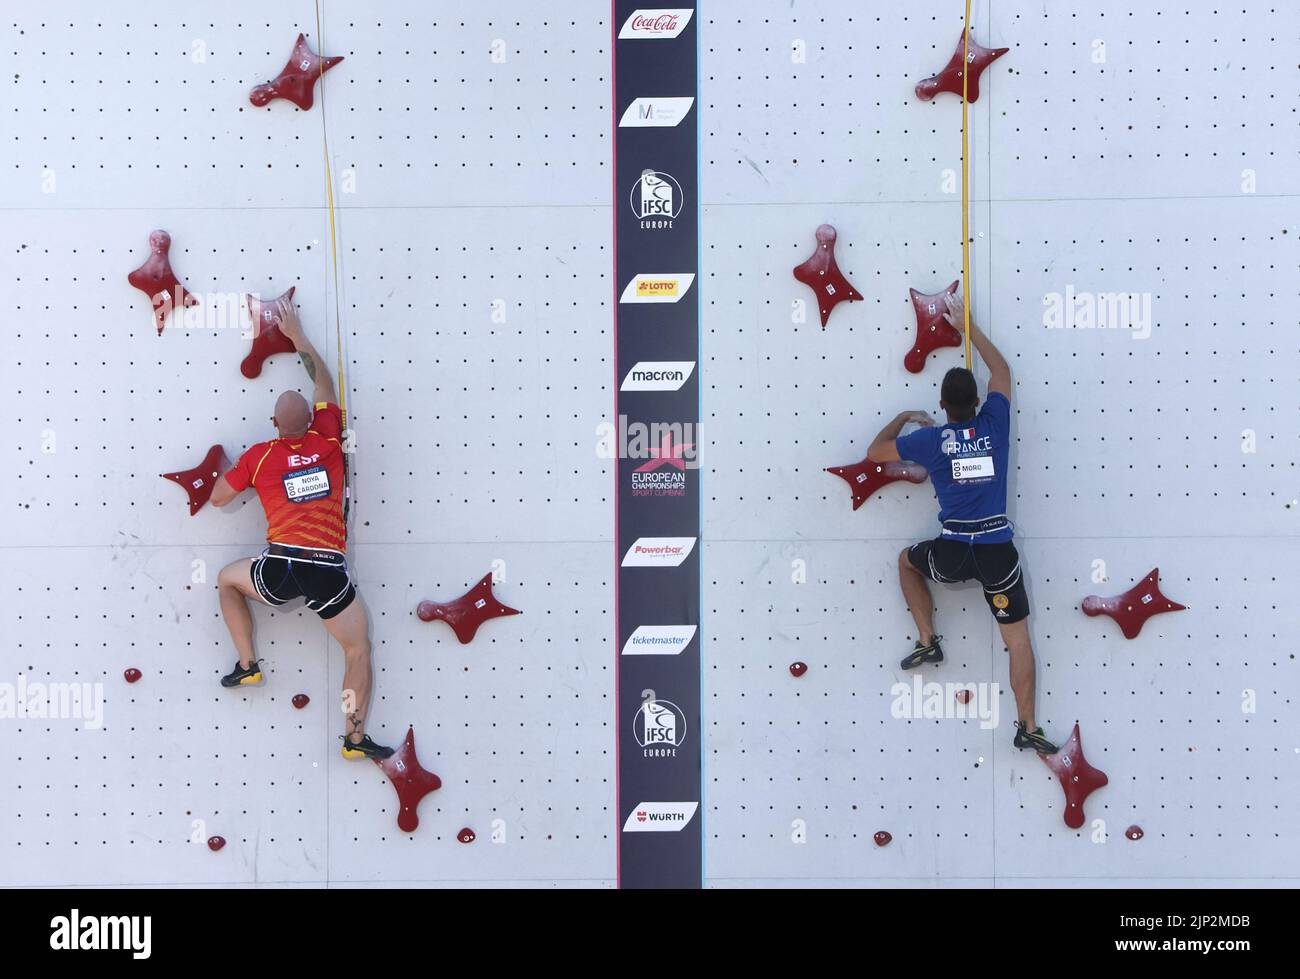 2022 European Championships - Sport Climbing - Konigsplatz, Munich, Germany - August 15, 2022 France's Guillaume Moro and Spain's Erik Paulo Noya Cardona in action during the men's speed small final REUTERS/Wolfgang Rattay Stock Photo